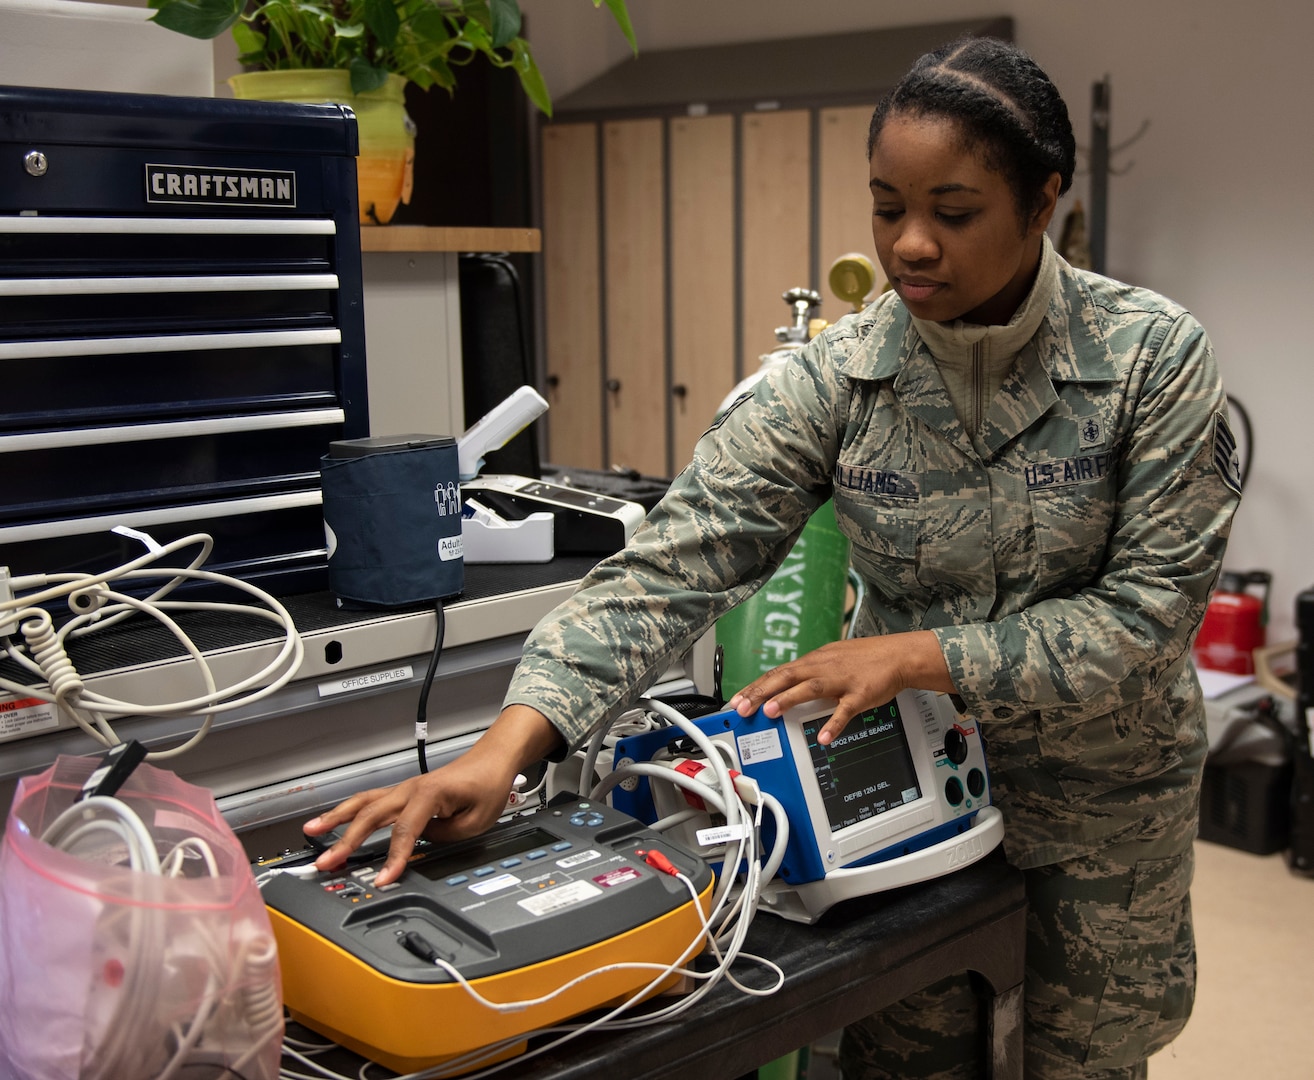 U.S. Air Force Staff Sgt. Neekia Williams, 52nd Medical Group biomedical equipment technician, turns on a defibrillator at Spangdahlem Air Base, Germany, April 1, 2020. Repairing medical equipment is vital to maintaining a healthy base populace. (U.S. Air Force photo by Senior Airman Melody W. Howley)